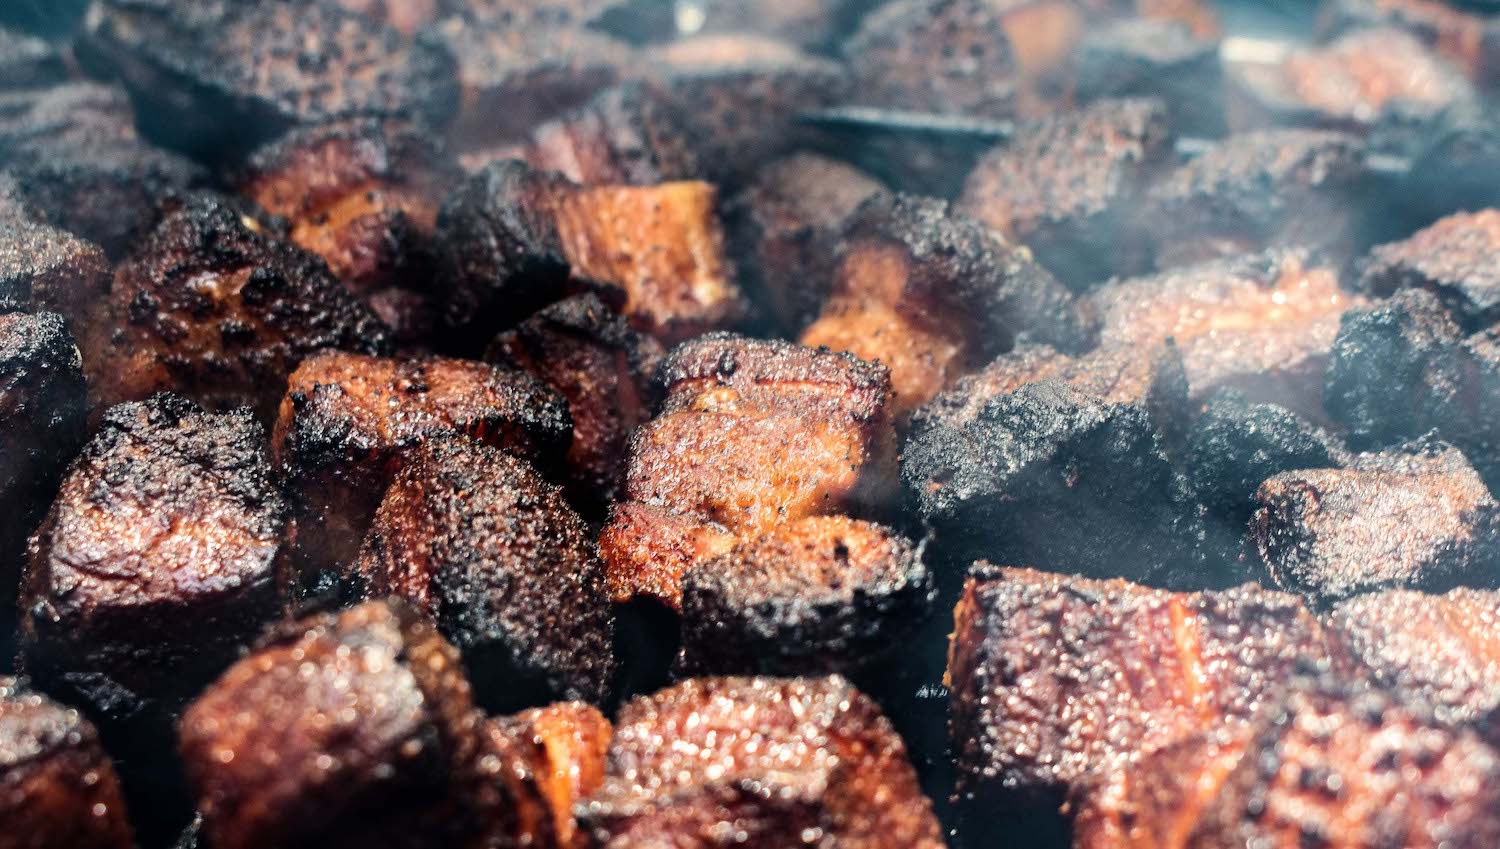 Close-up shot of numerous pieces of burnt ends, smoked beef brisket pieces, featuring a dark, caramelized bark on their surface, with some visible steam or smoke wafting through. The texture appears crispy and charred.